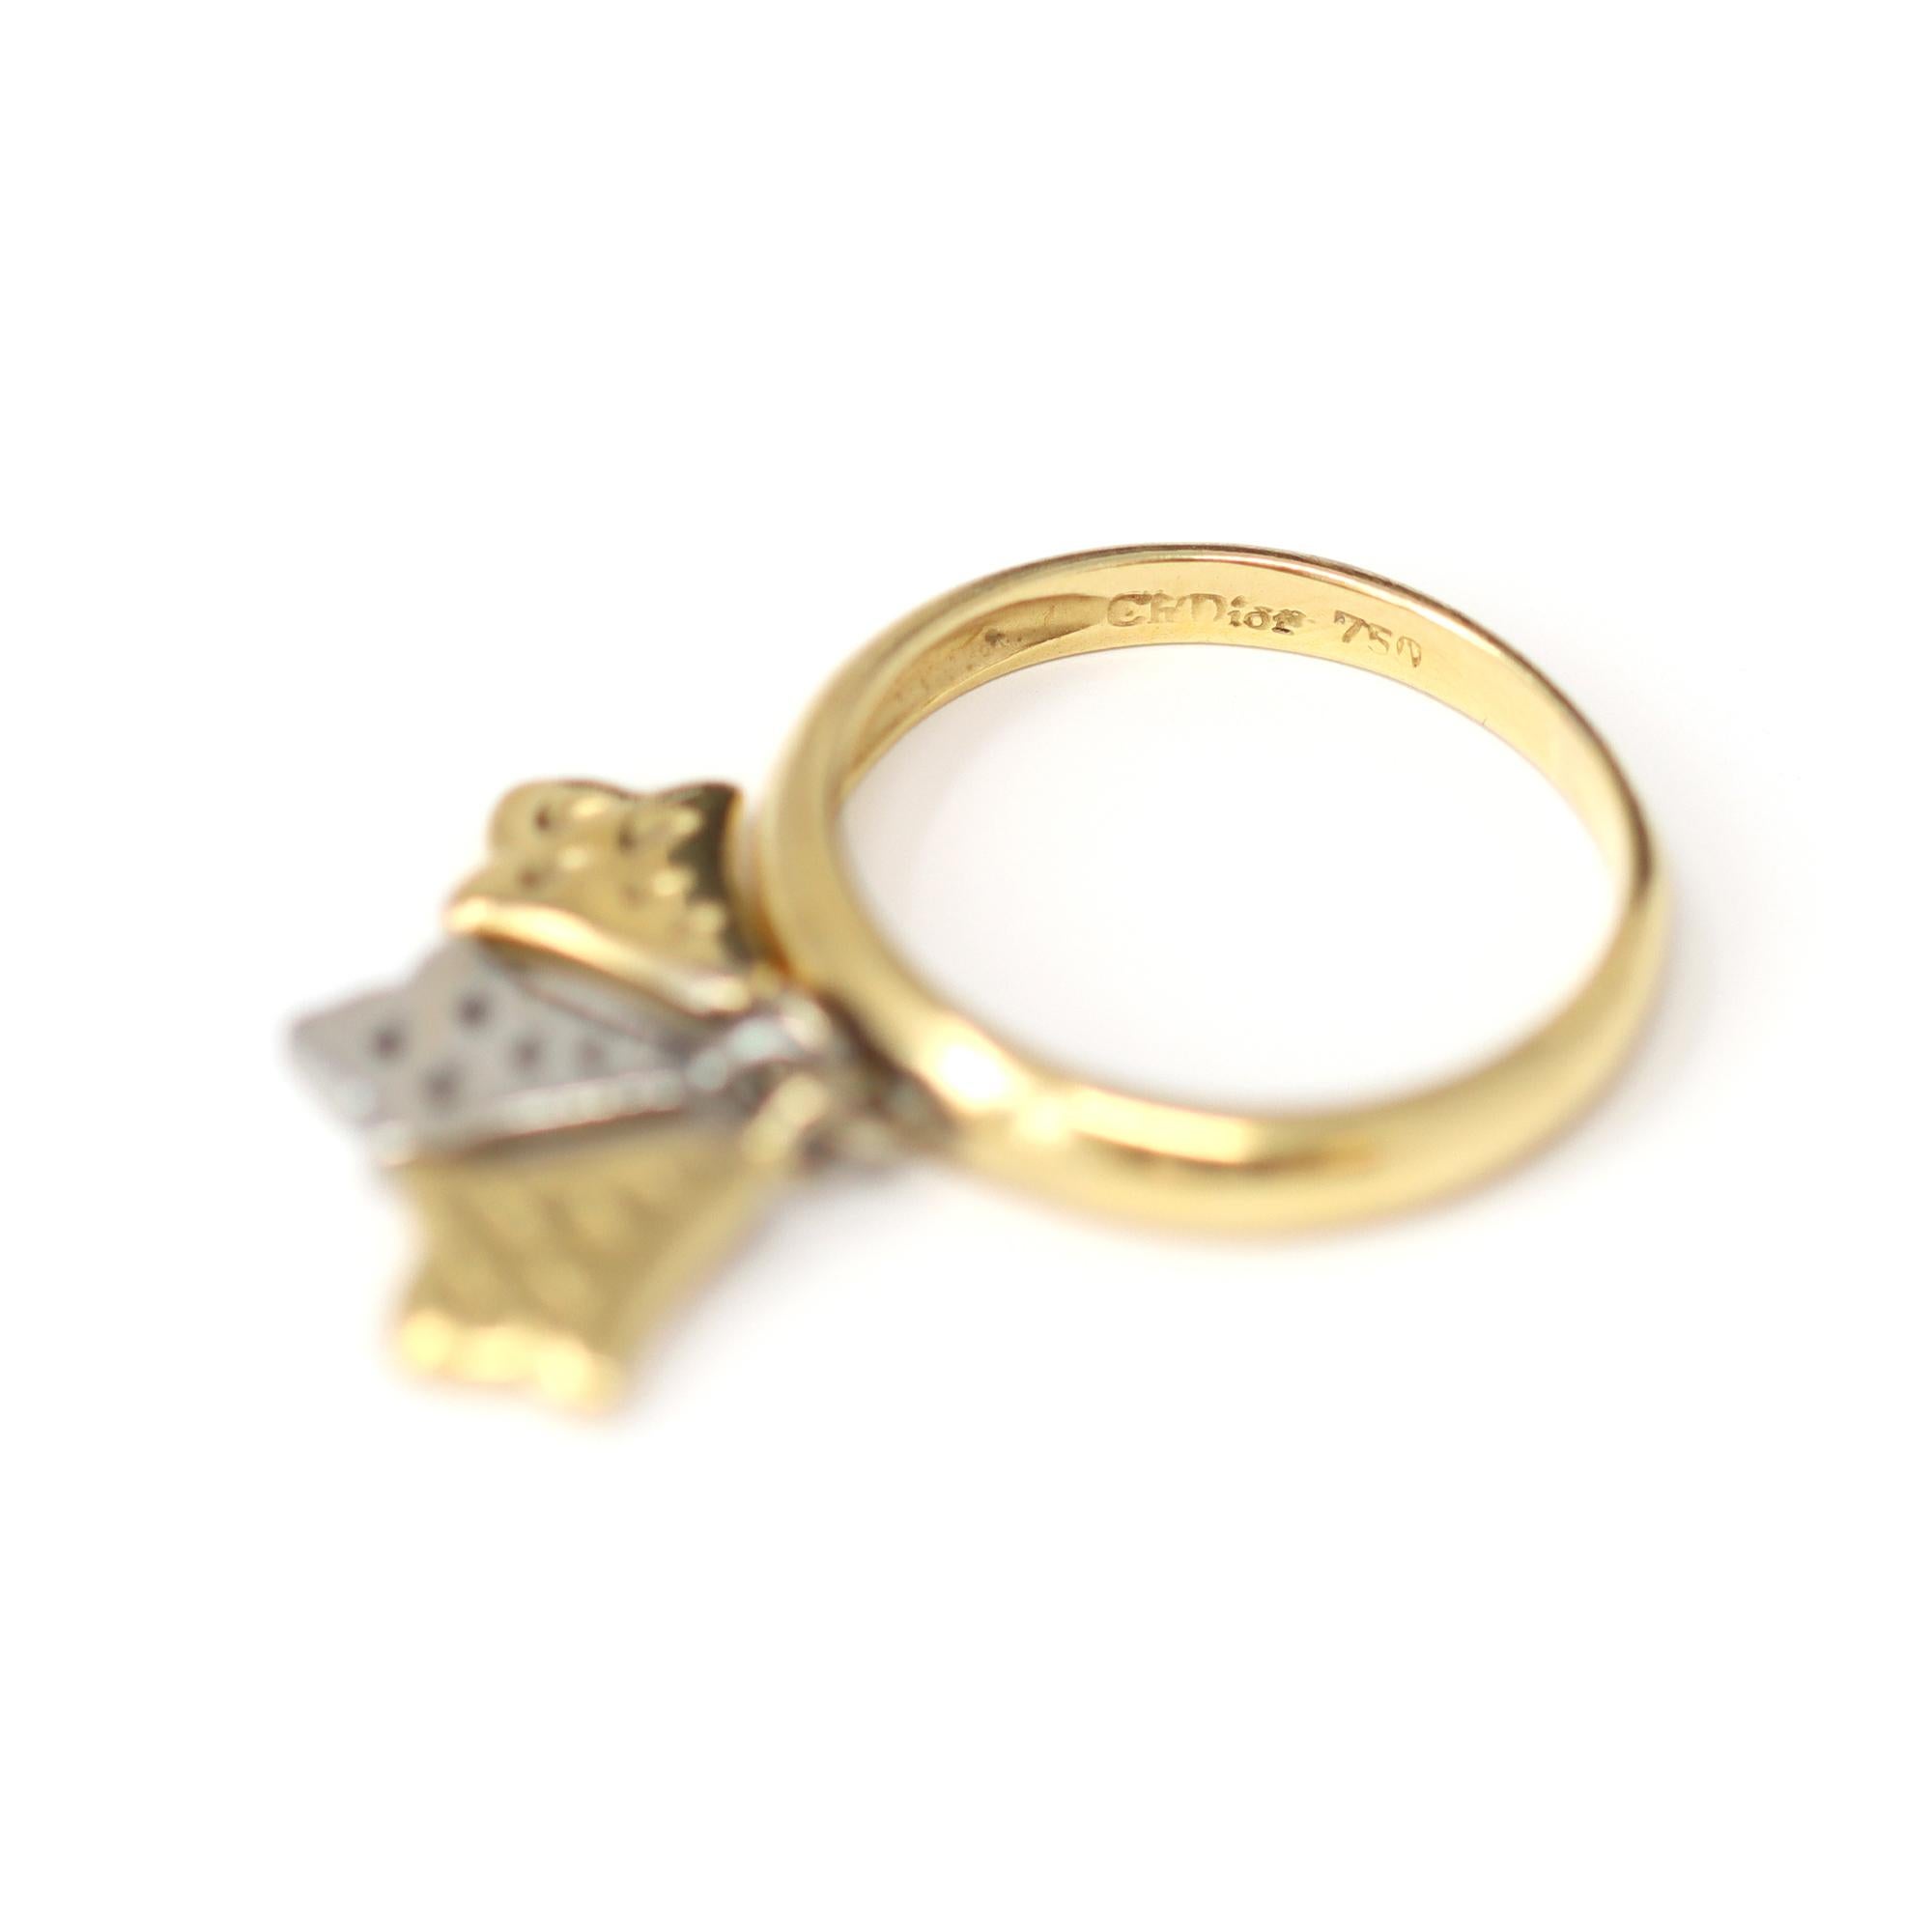 A playful dangling charm ring by the iconic house of Christian Dior. The one-of-a-kind 3-charms ring is made in 18-karat yellow gold, and one of the charms is platinum. It fits a size 6½ and has a gross weight of 5 grams. The ring is signed and